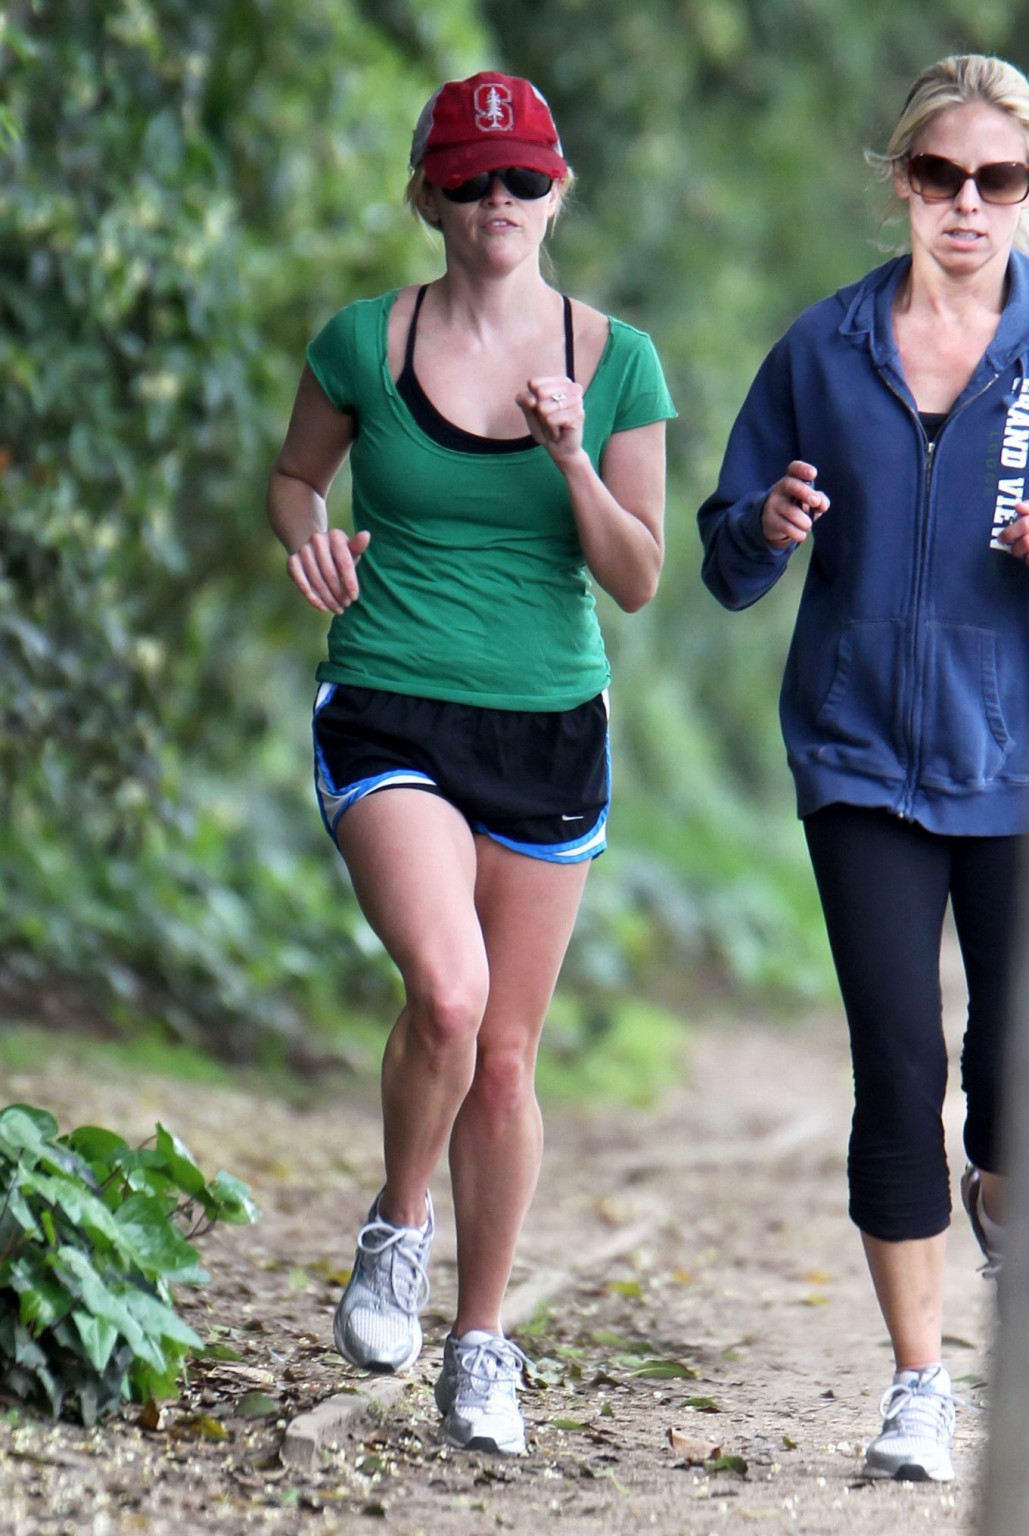 Reese Witherspoon langbeinig in Shorts beim Joggen in Brentwood
 #75312891